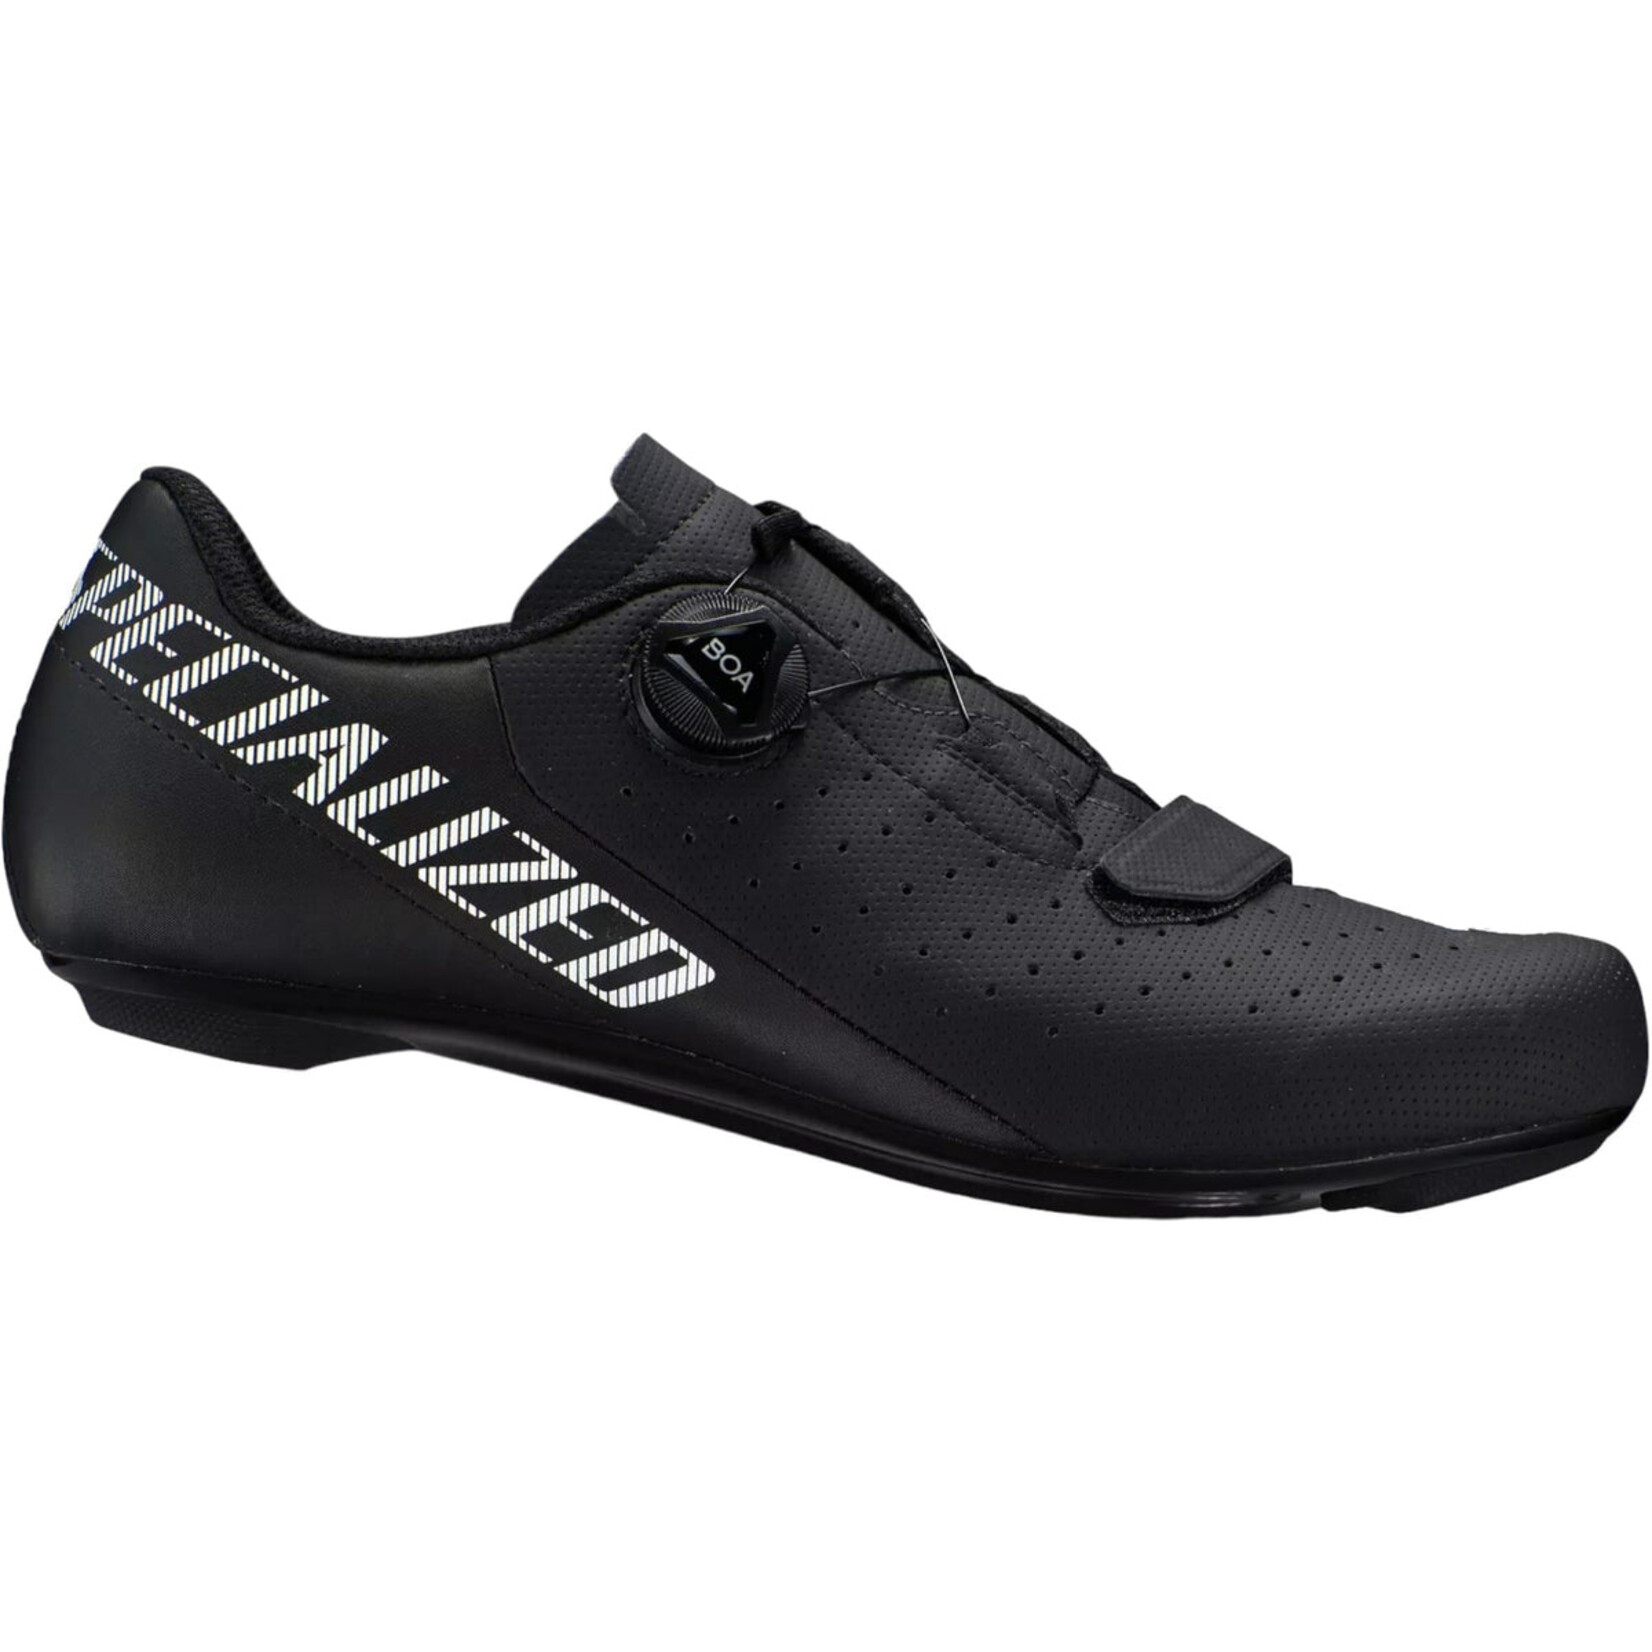 Specialized Chaussures de route Torch 1.0